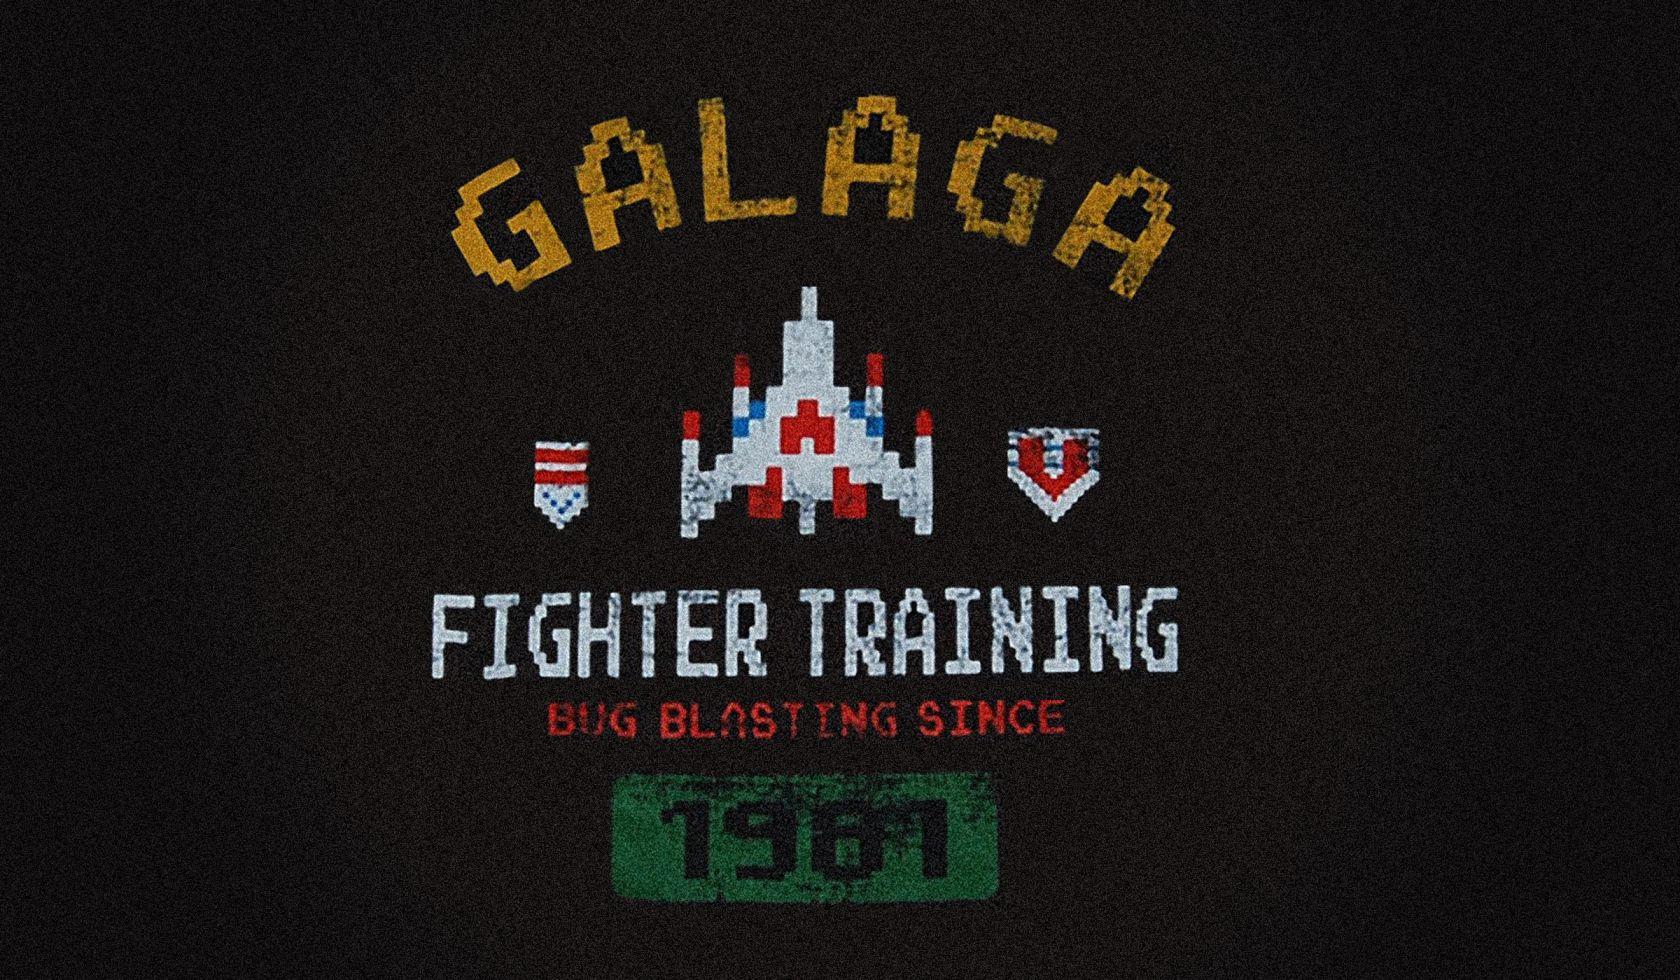 Galaga Logo - Every Mission is a Suicide Mission